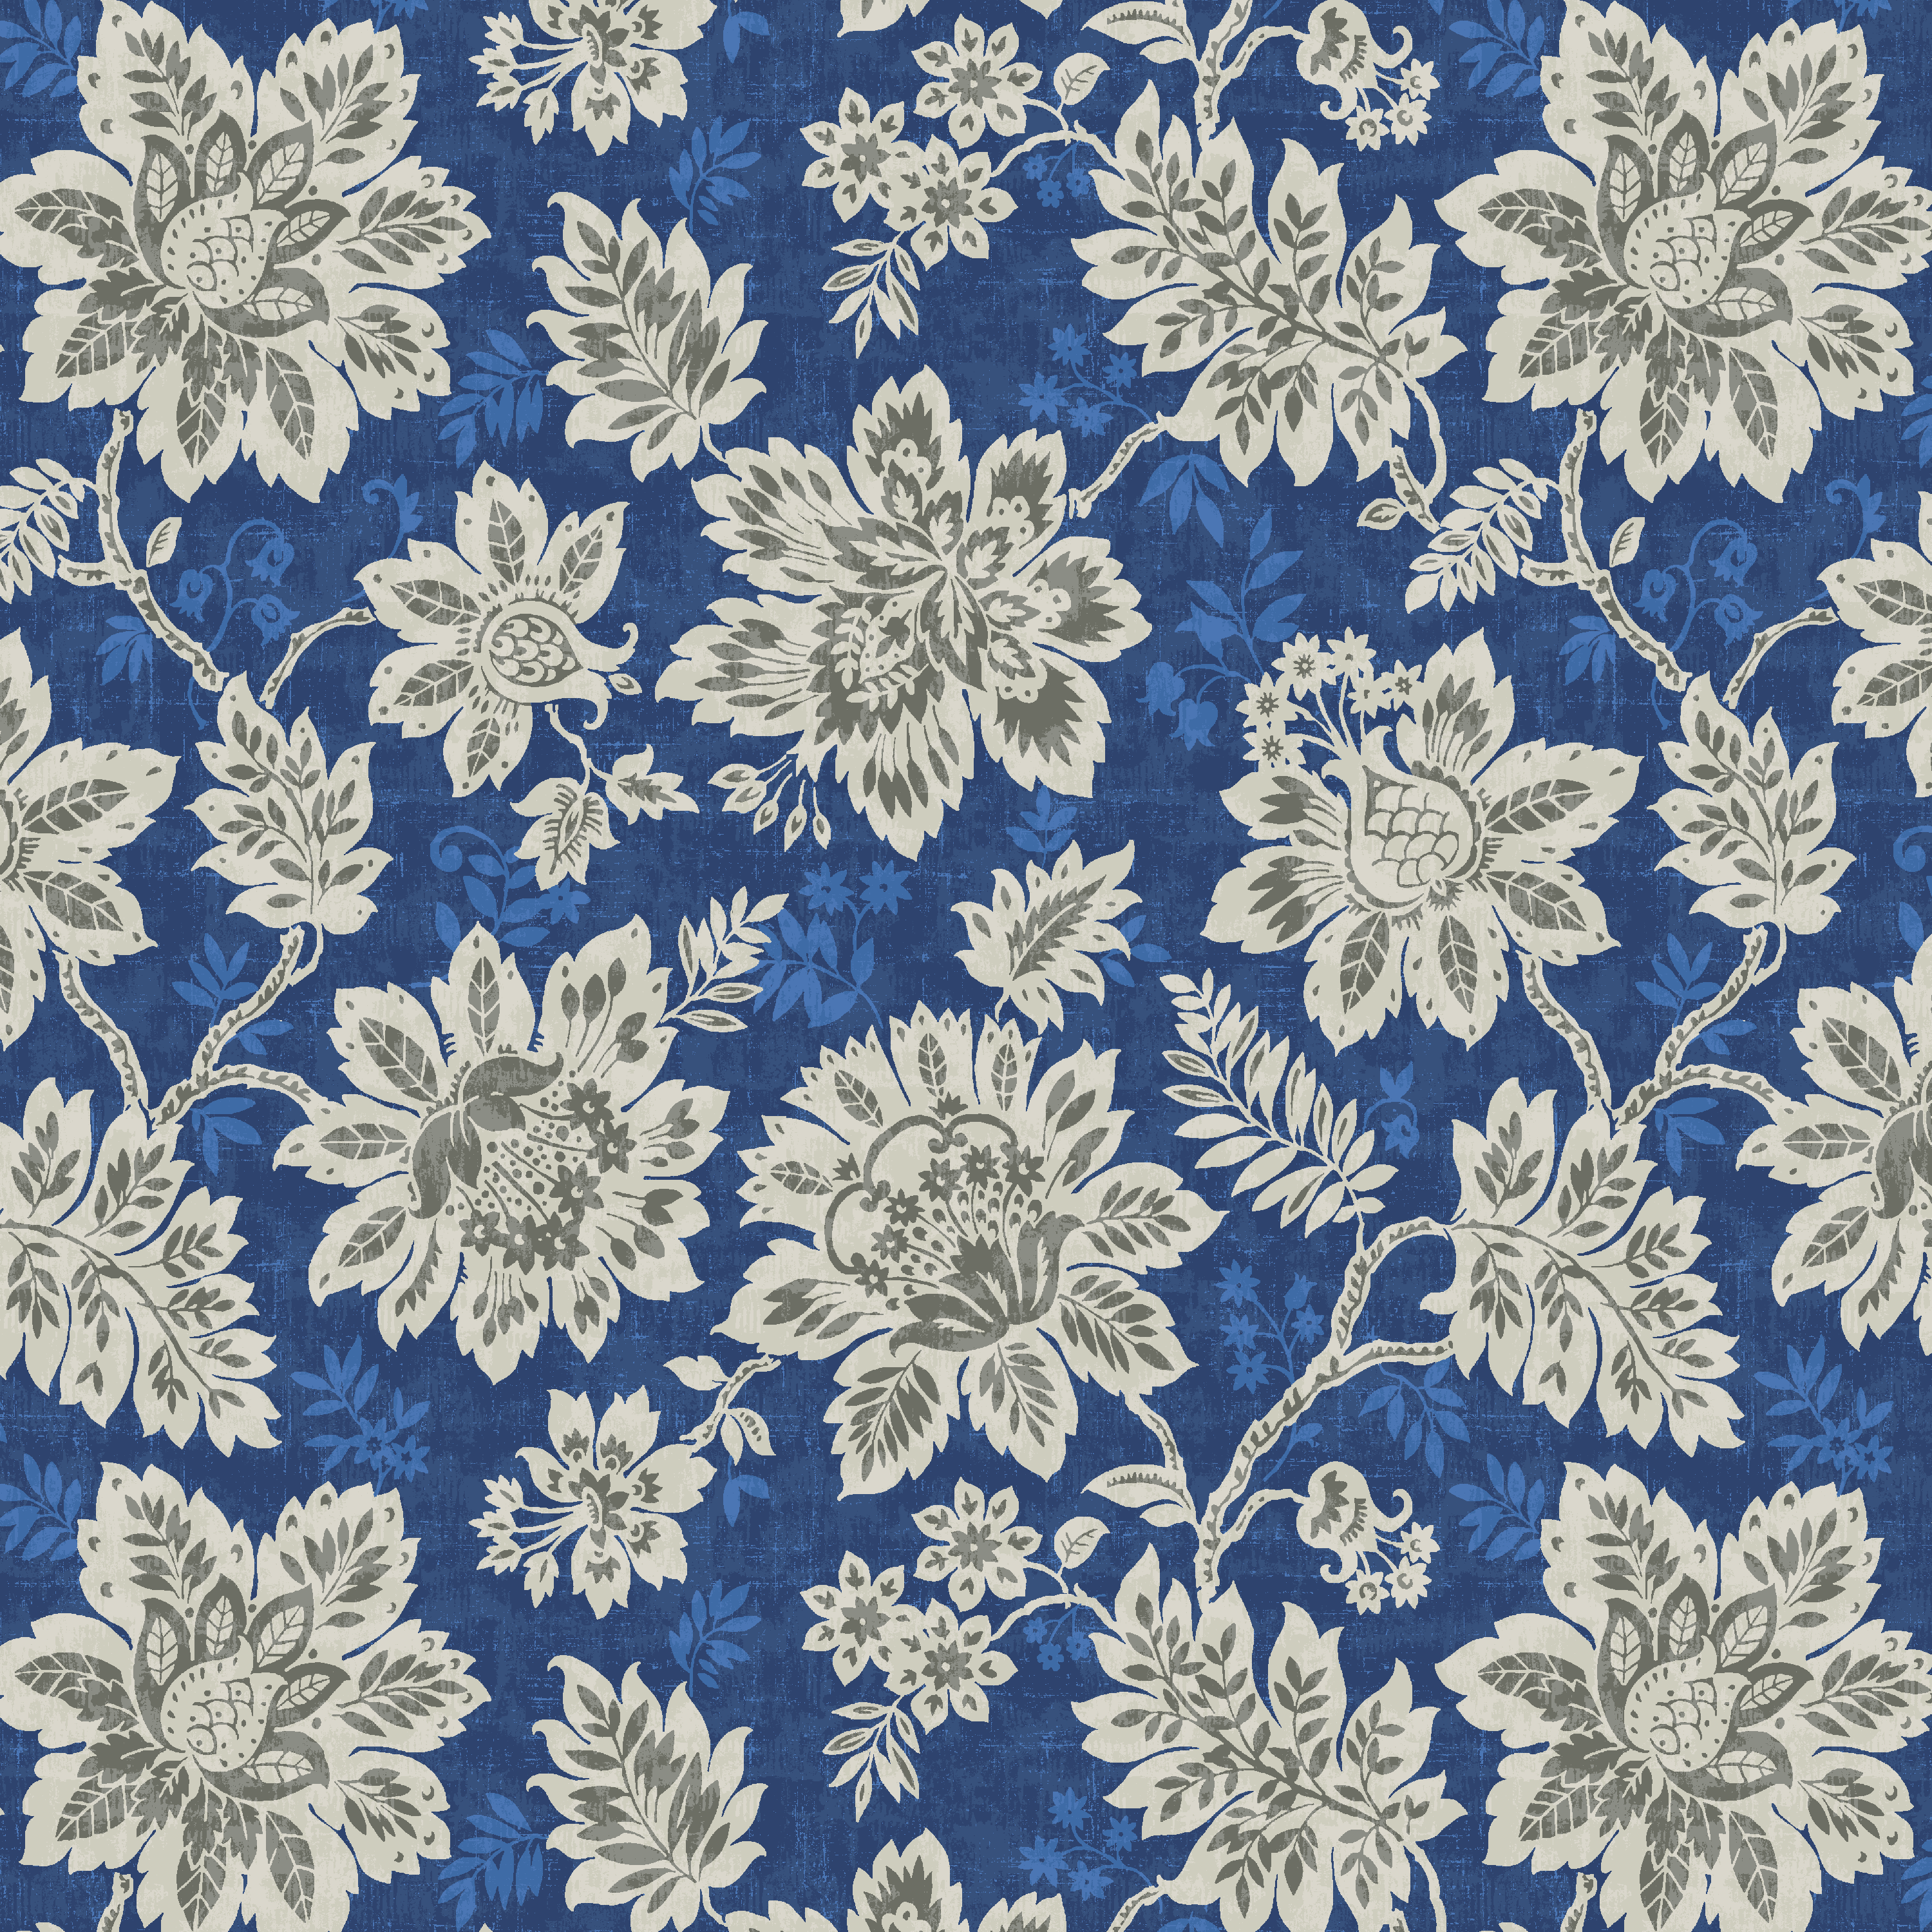 Waverly Inspirations 100% Cotton Duck 45" Petal Blue Color Sewing Fabric by the Yard